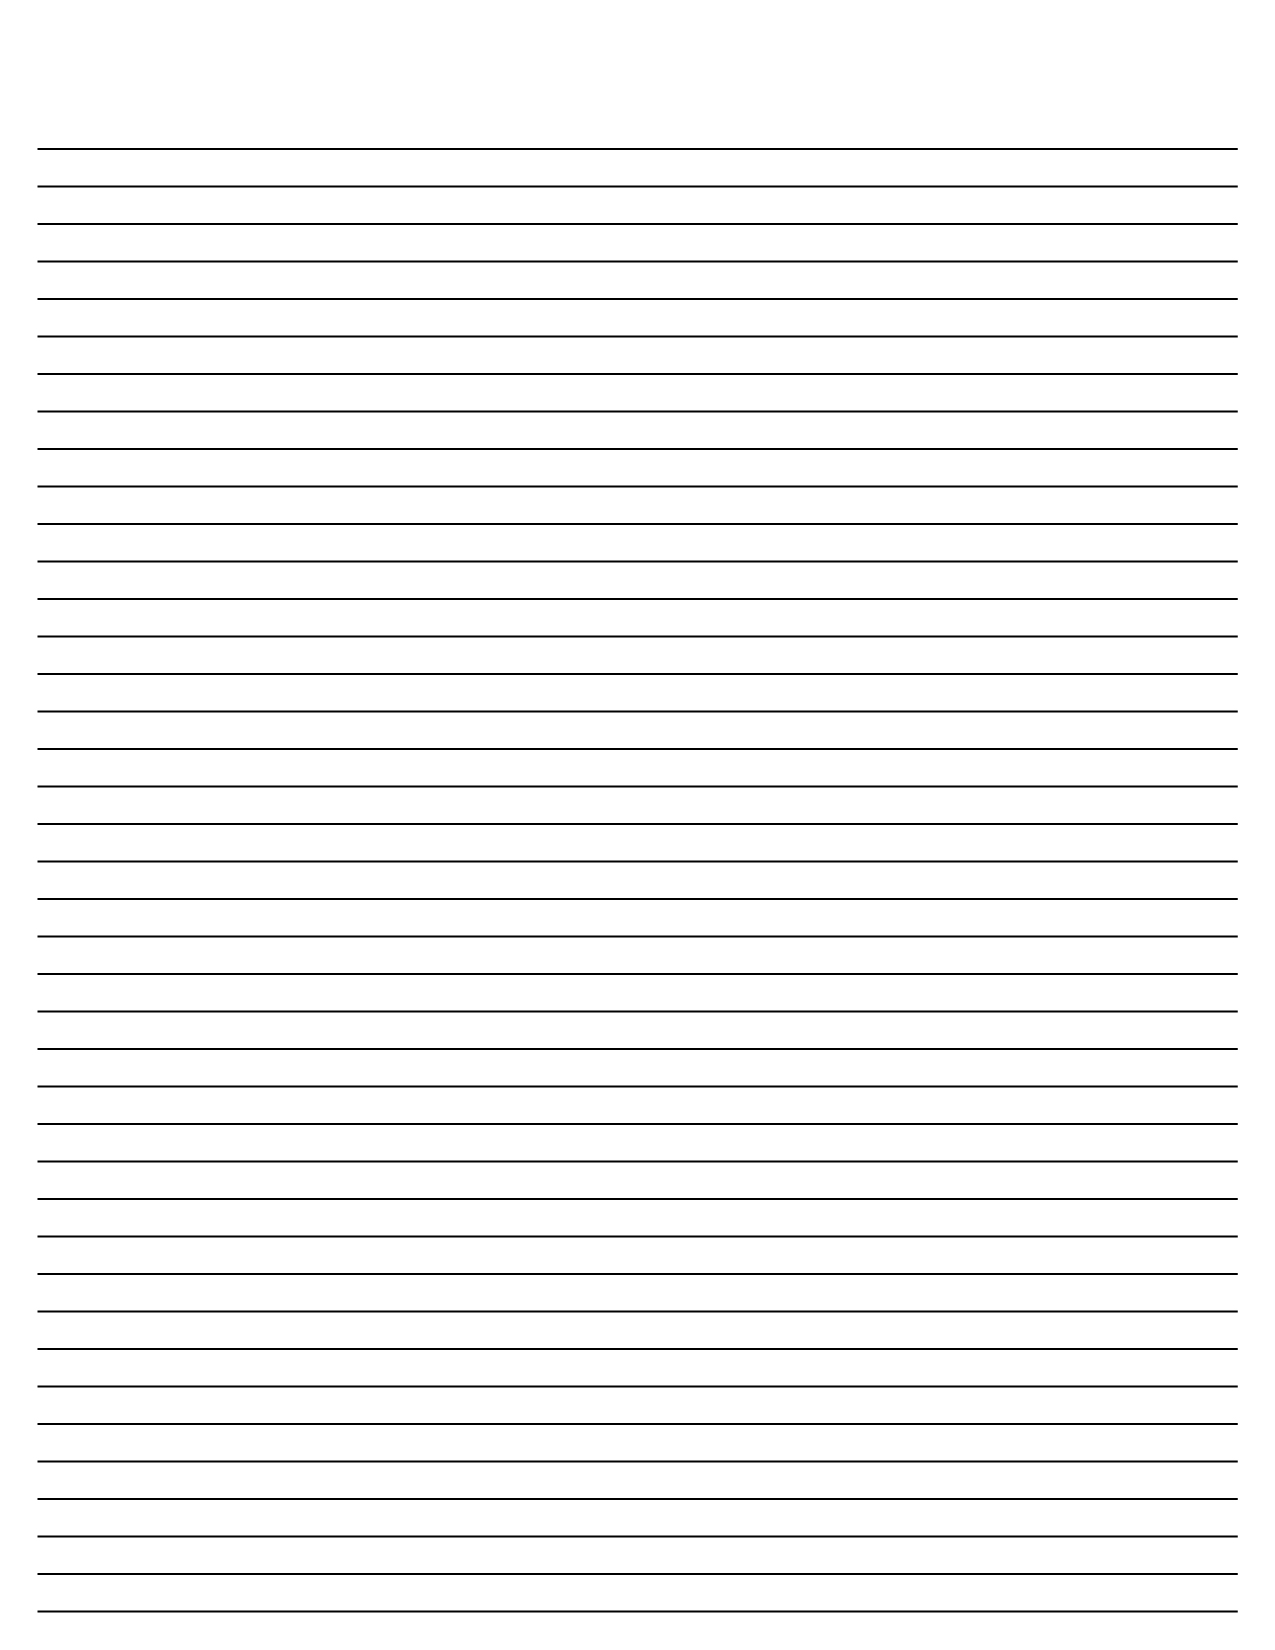 7-best-images-of-printable-lined-stationary-template-printable-lined-writing-paper-free